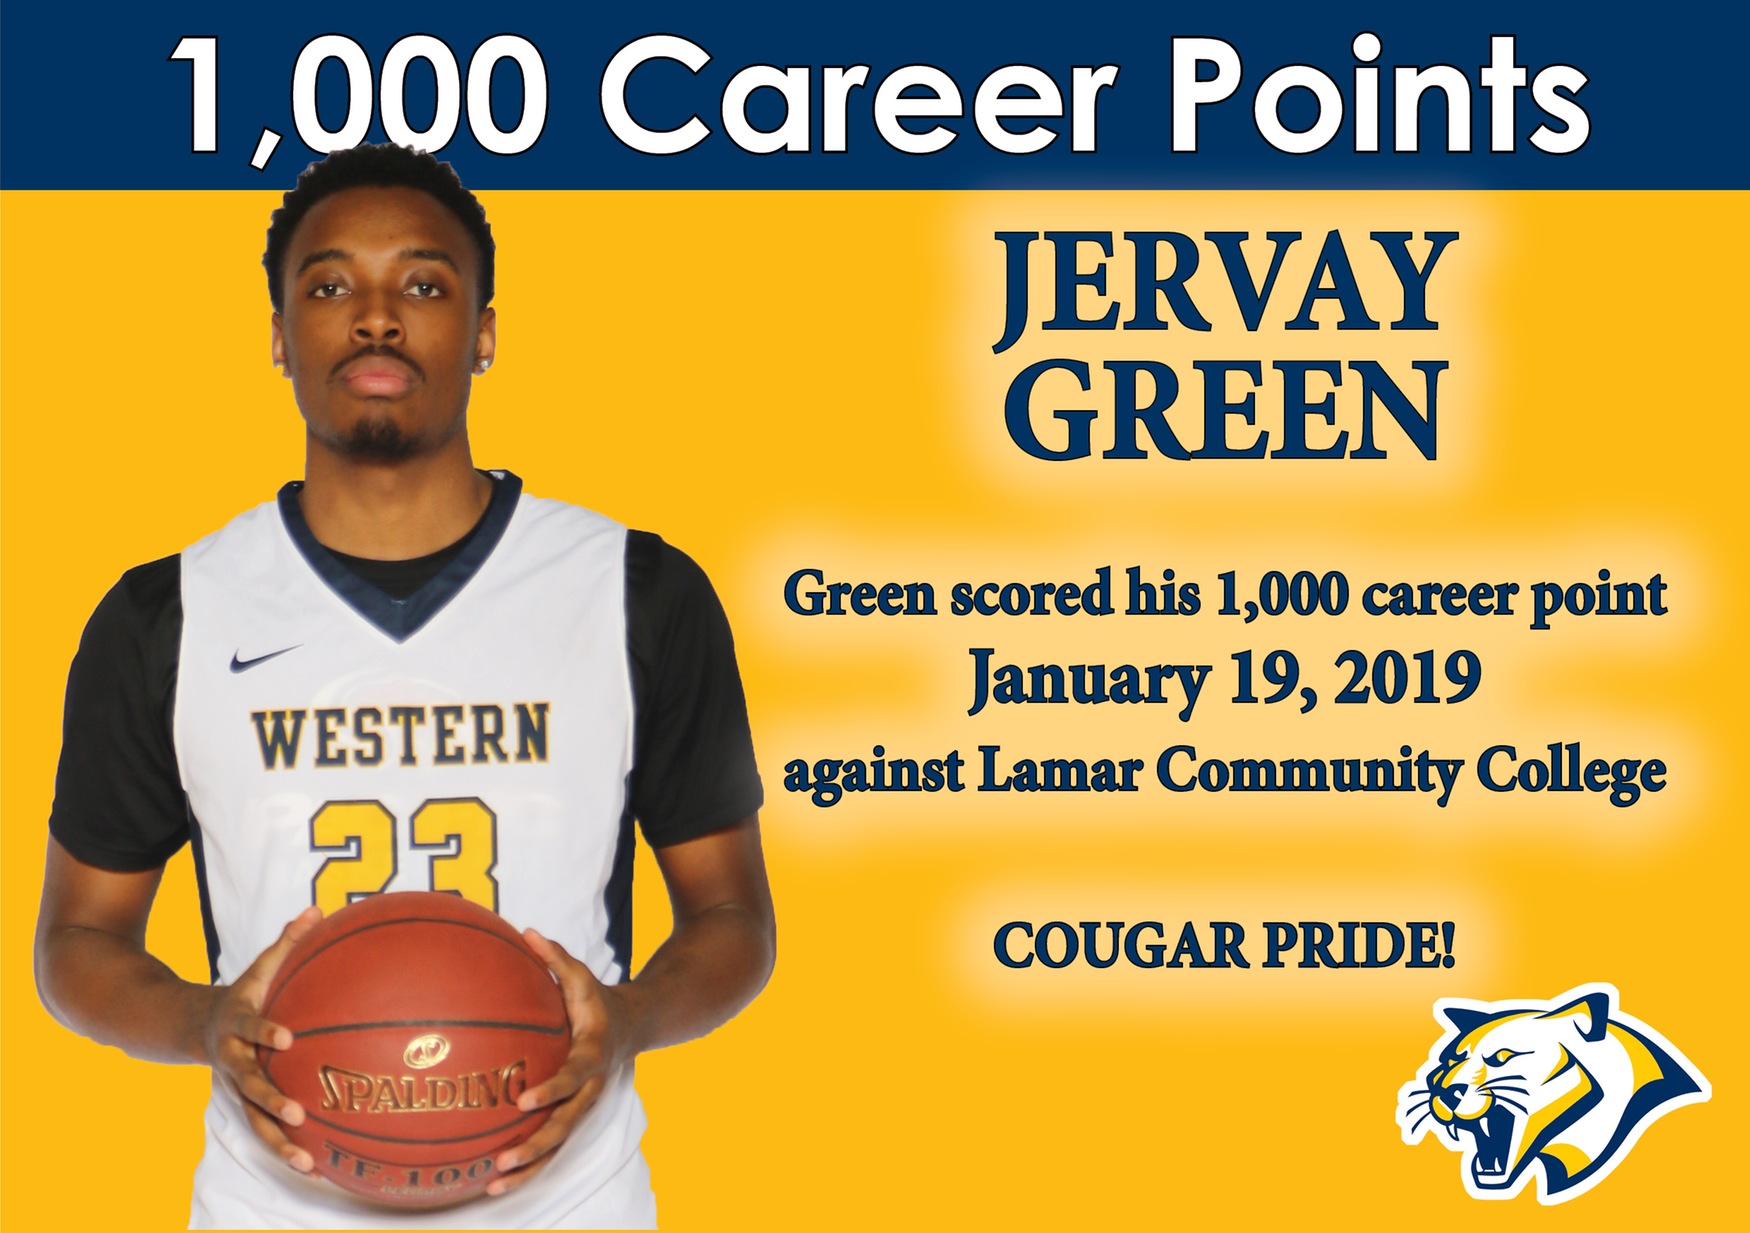 Green 1,000 career point